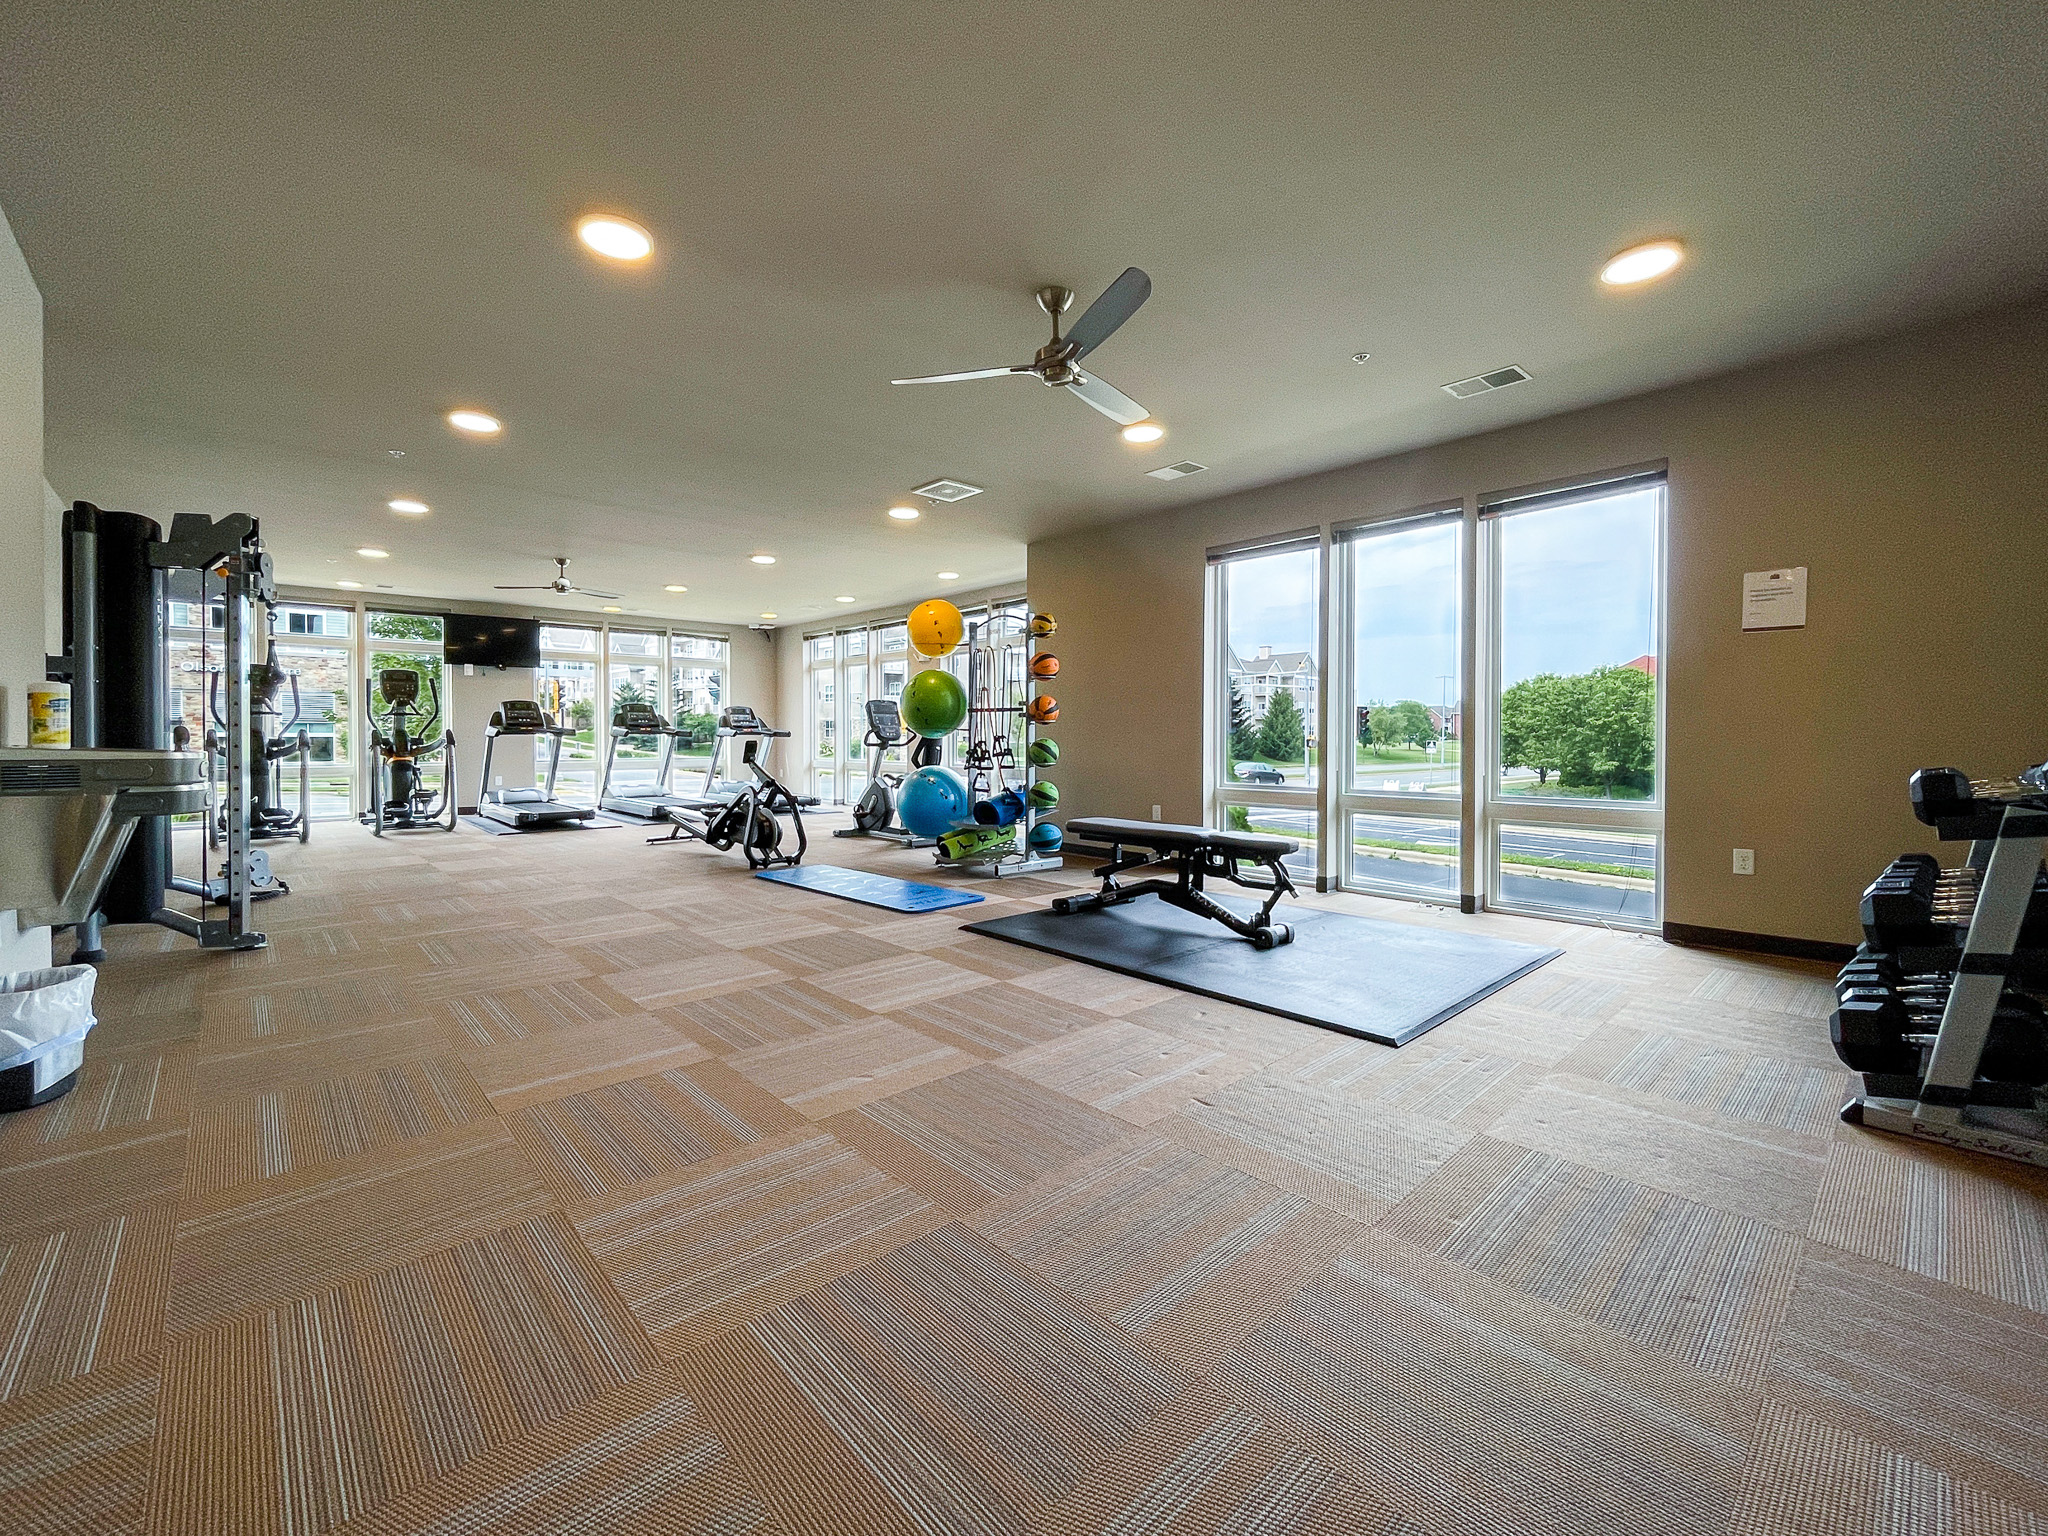 A gym area with floor to ceiling windows and various workout equipment around the room